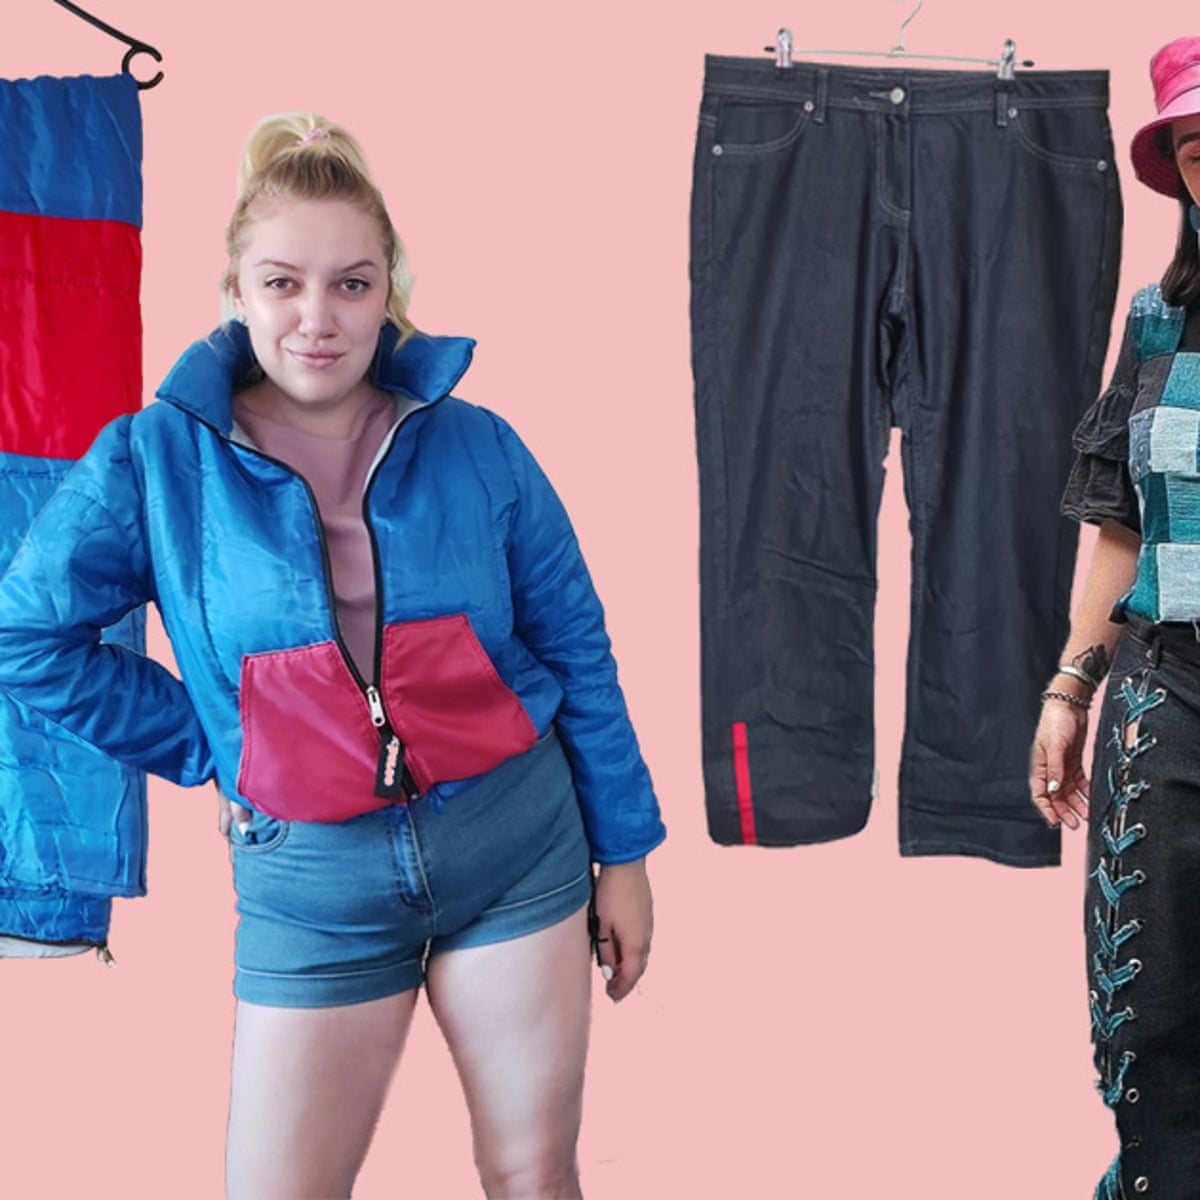 Extreme makeovers: how to upcycle unloved clothes into something